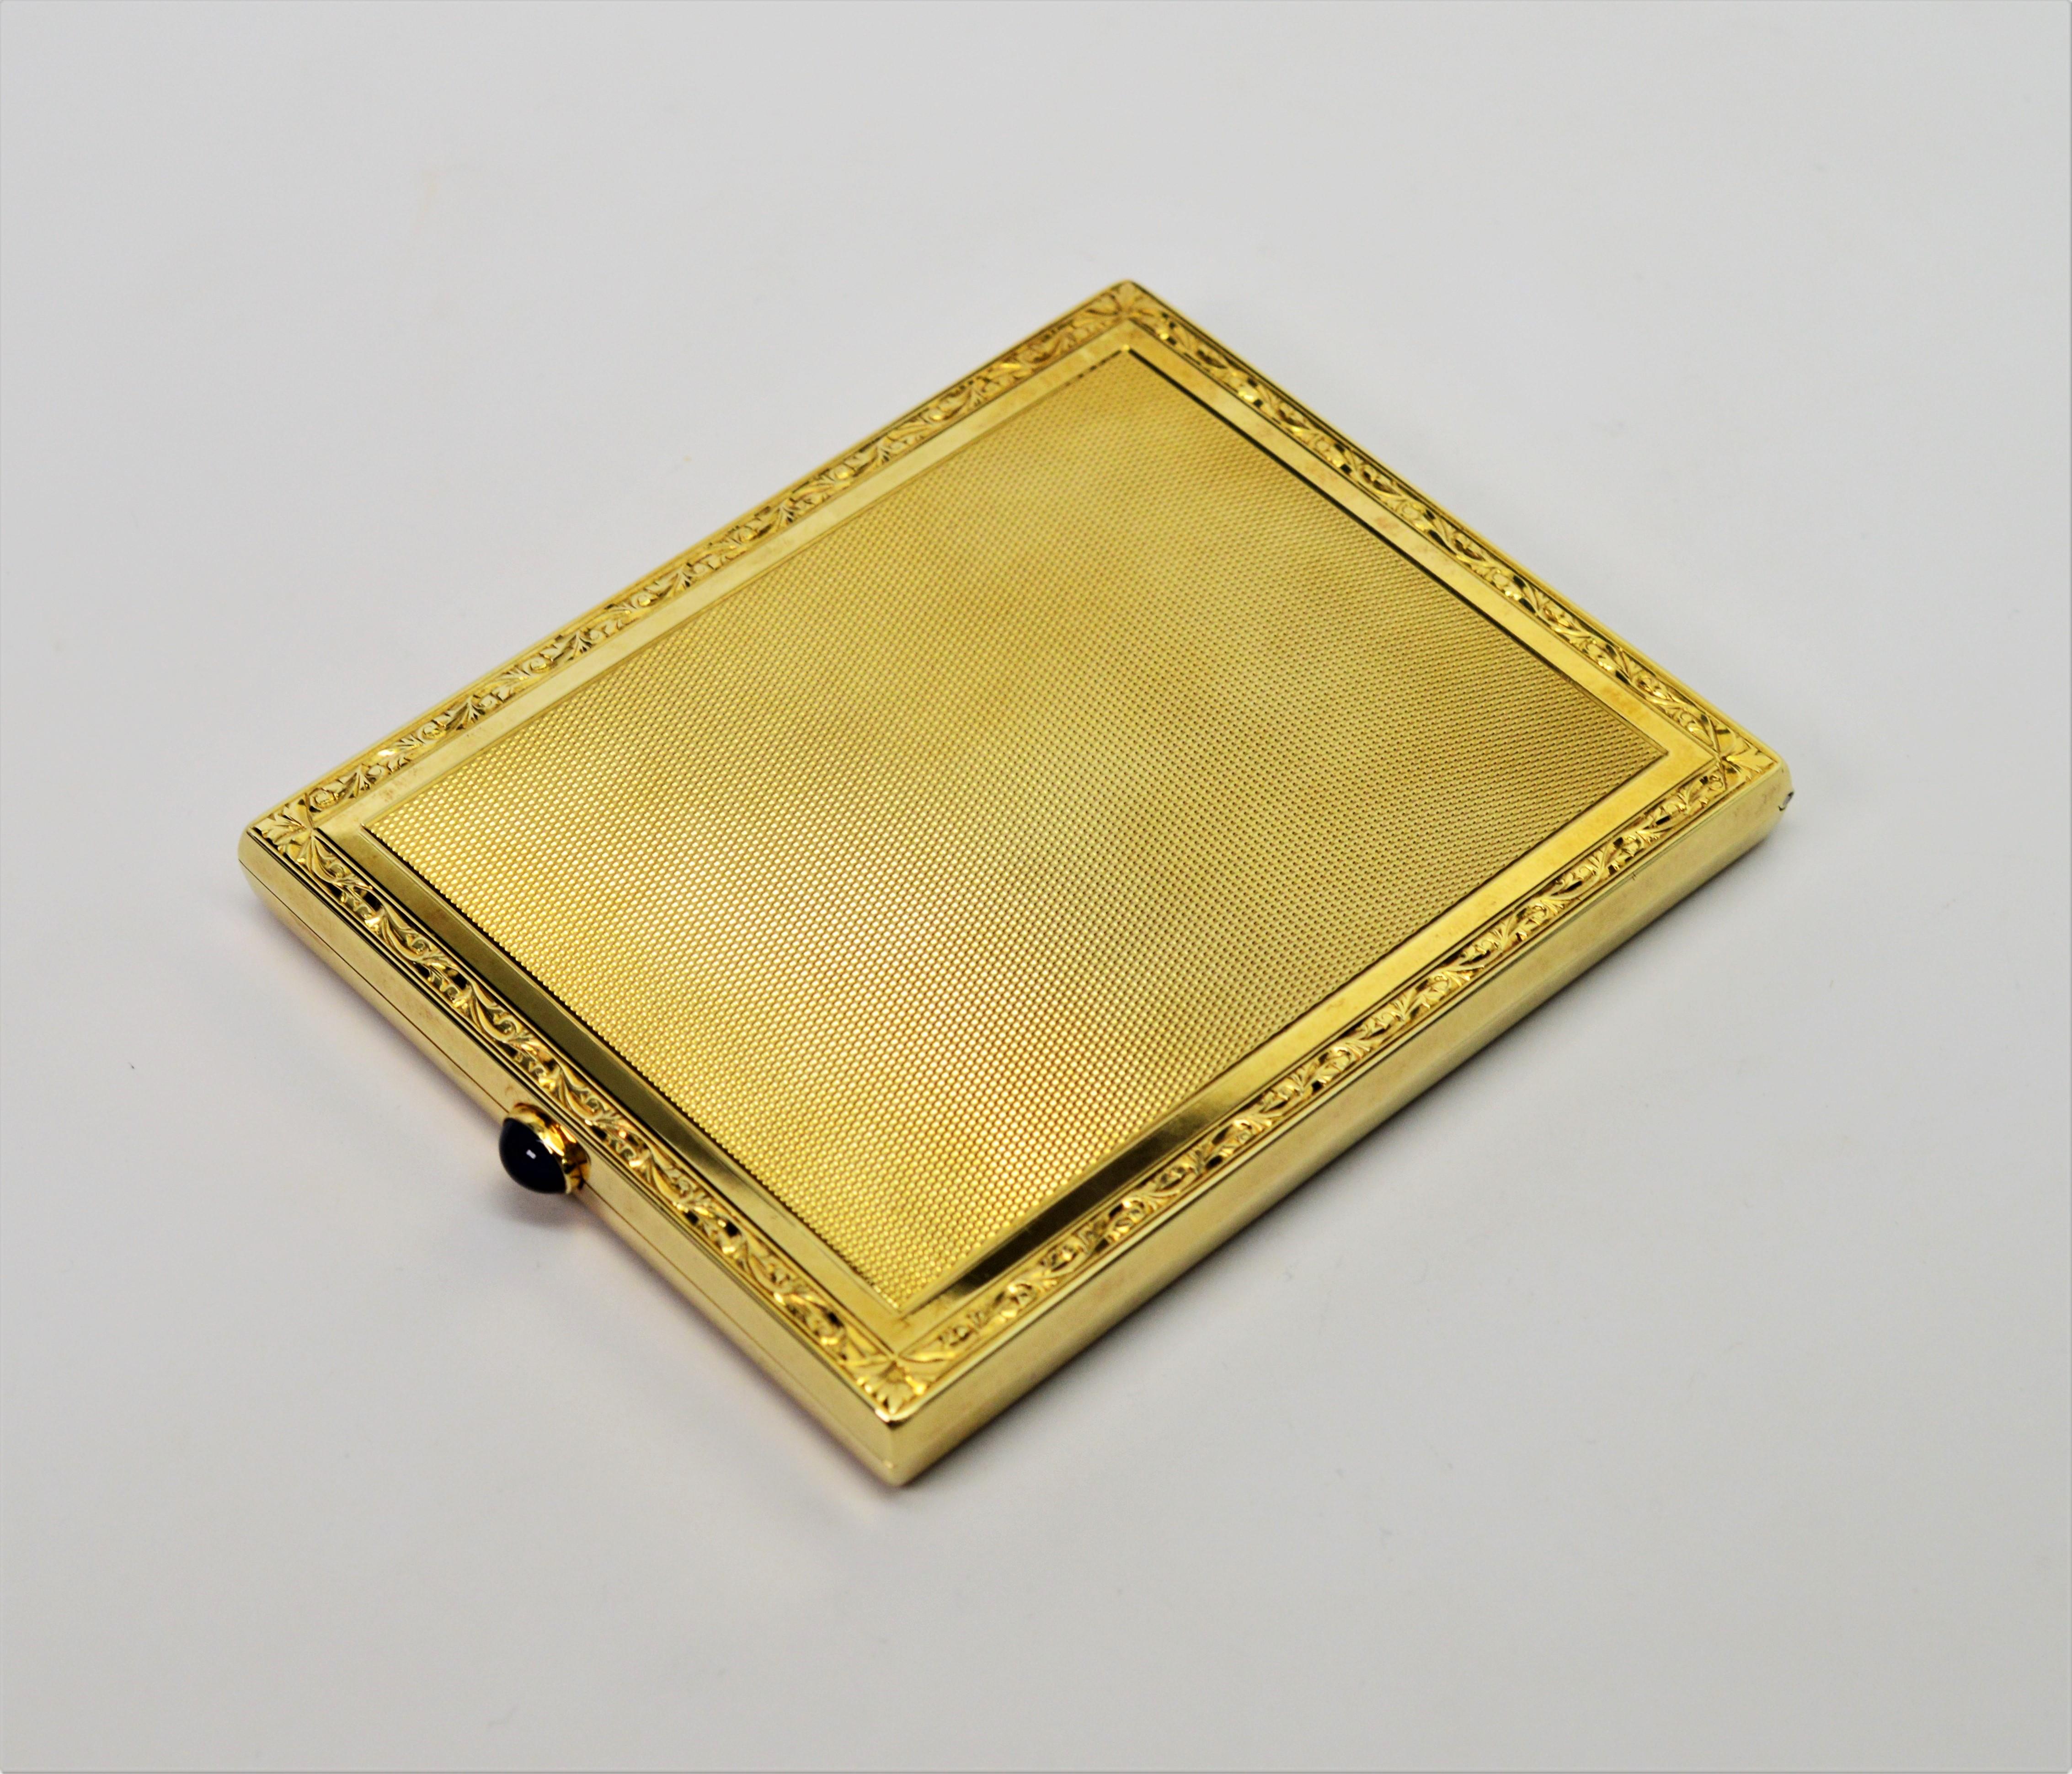 Impressive, in original condition, uncleaned with original toning, this minty fourteen carat 14K yellow gold retro cigarette case is quite the find. Measuring 4 inches long by 3-1/4 inches wide by 3/8 inch deep, the case's quality and fine condition